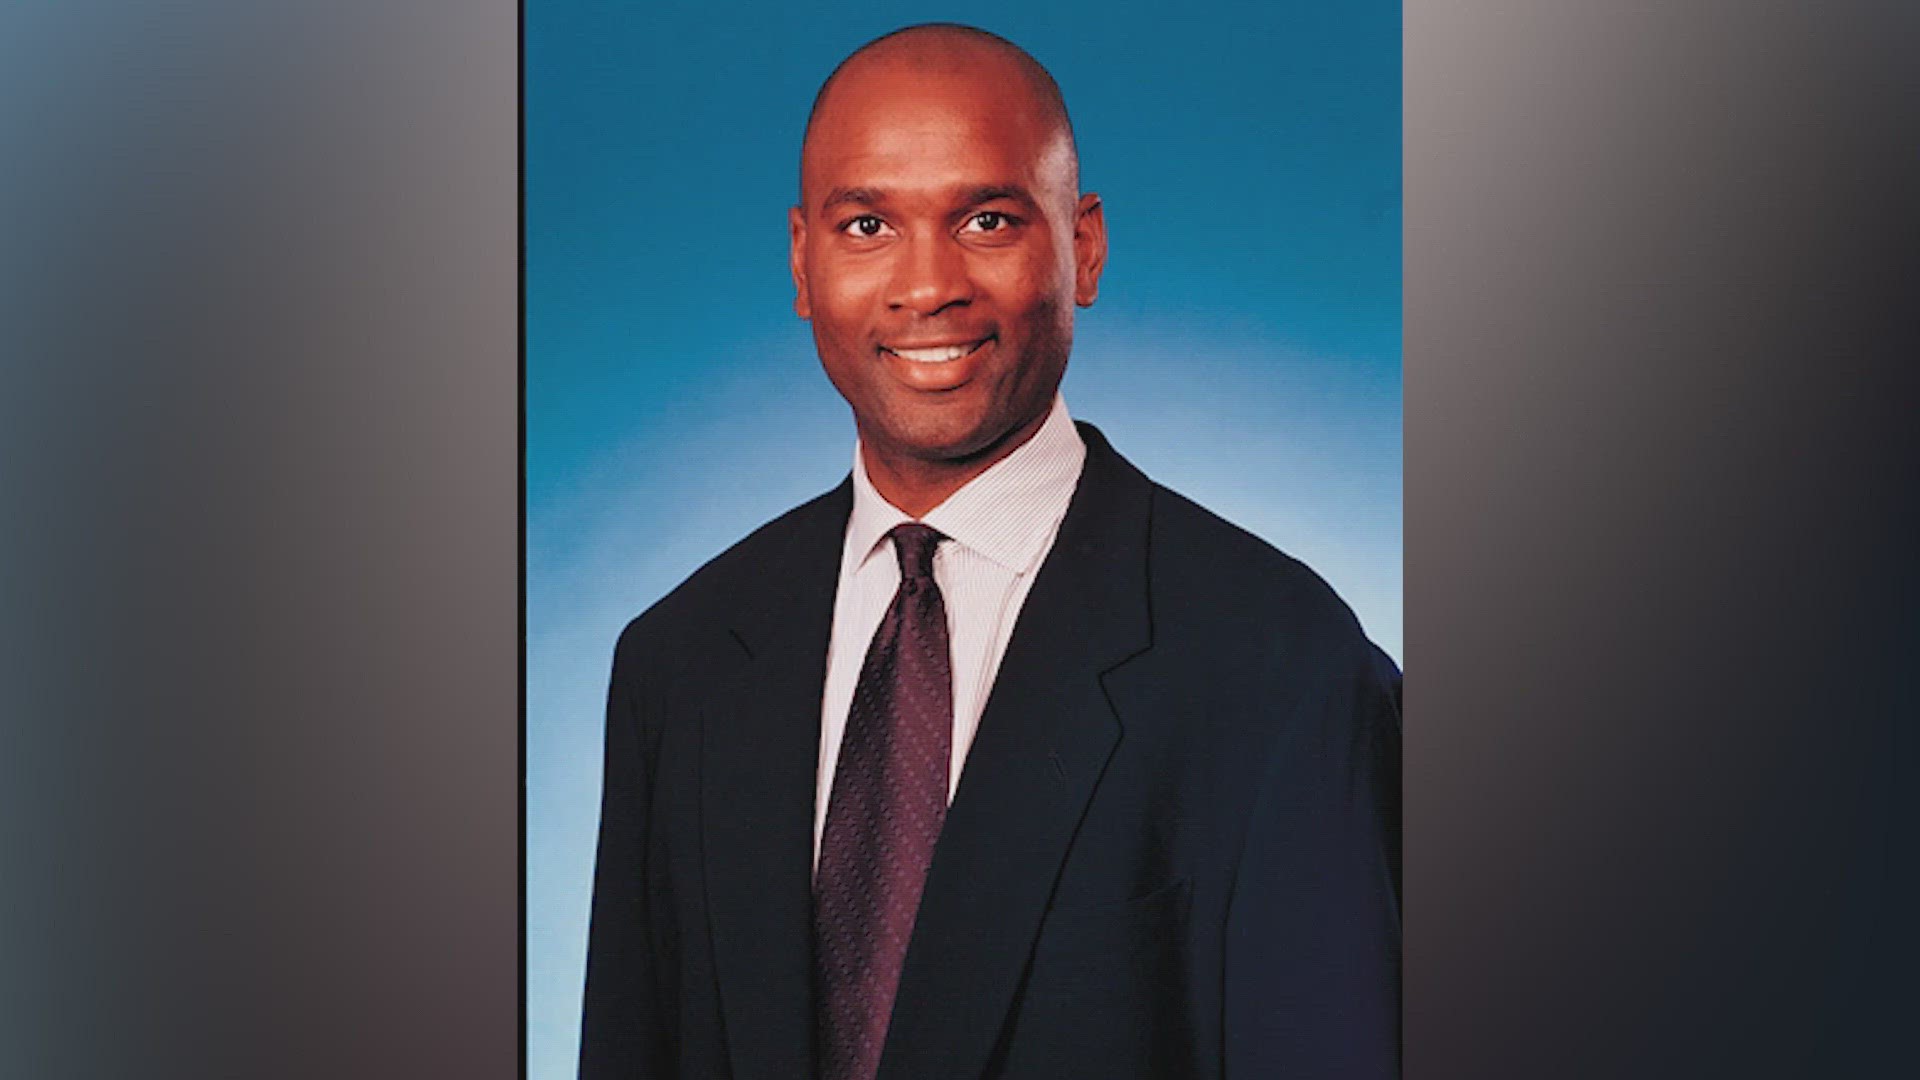 Blanks joined the Spurs in 2000 as a scout and served as the team's television analyst during the 2004-2005 season.